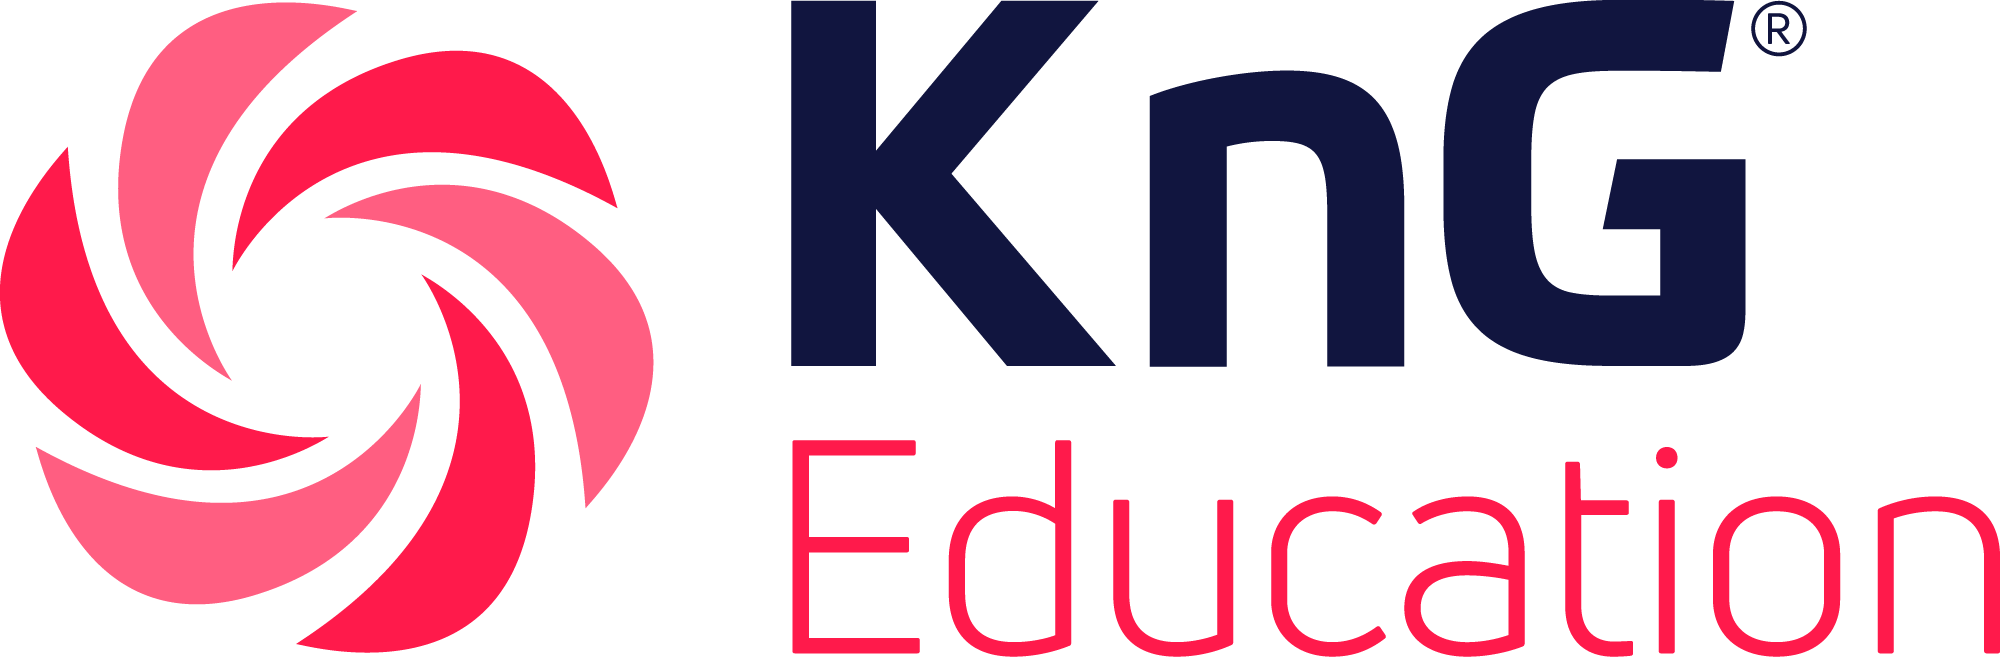 KnG Education